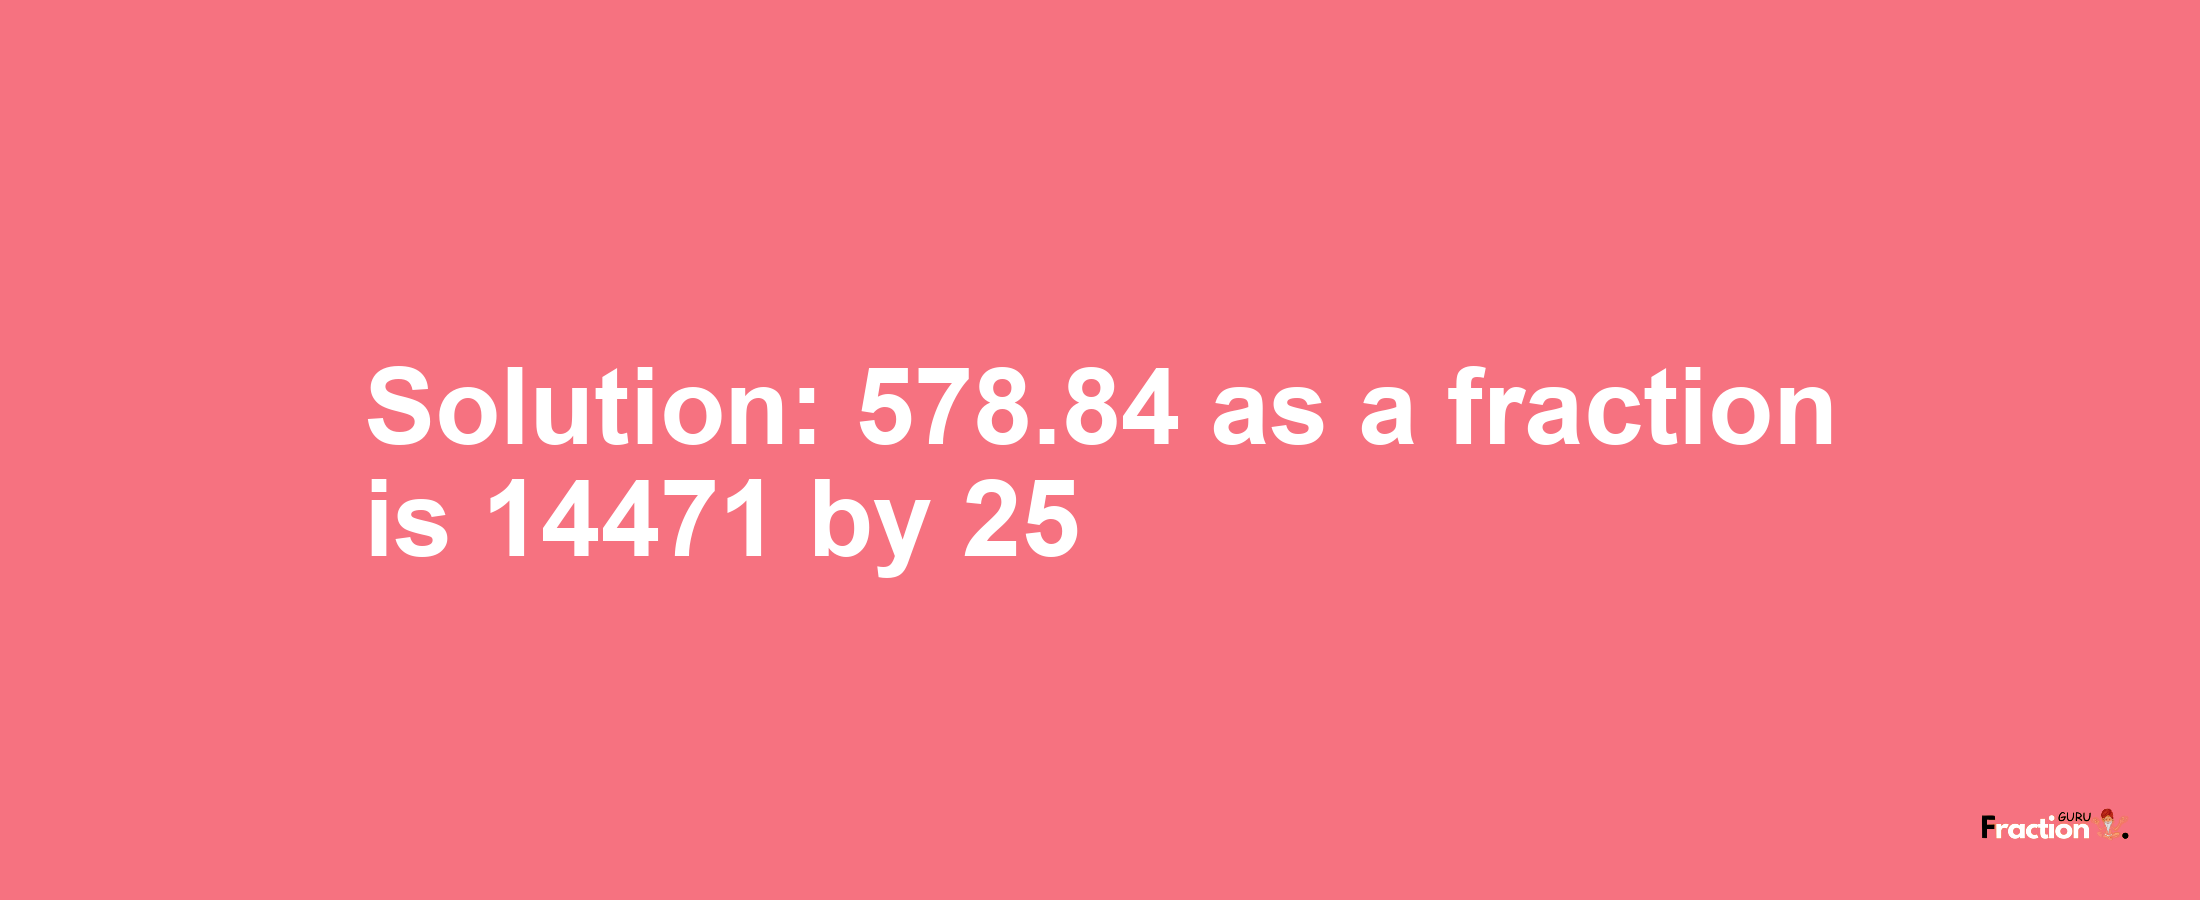 Solution:578.84 as a fraction is 14471/25